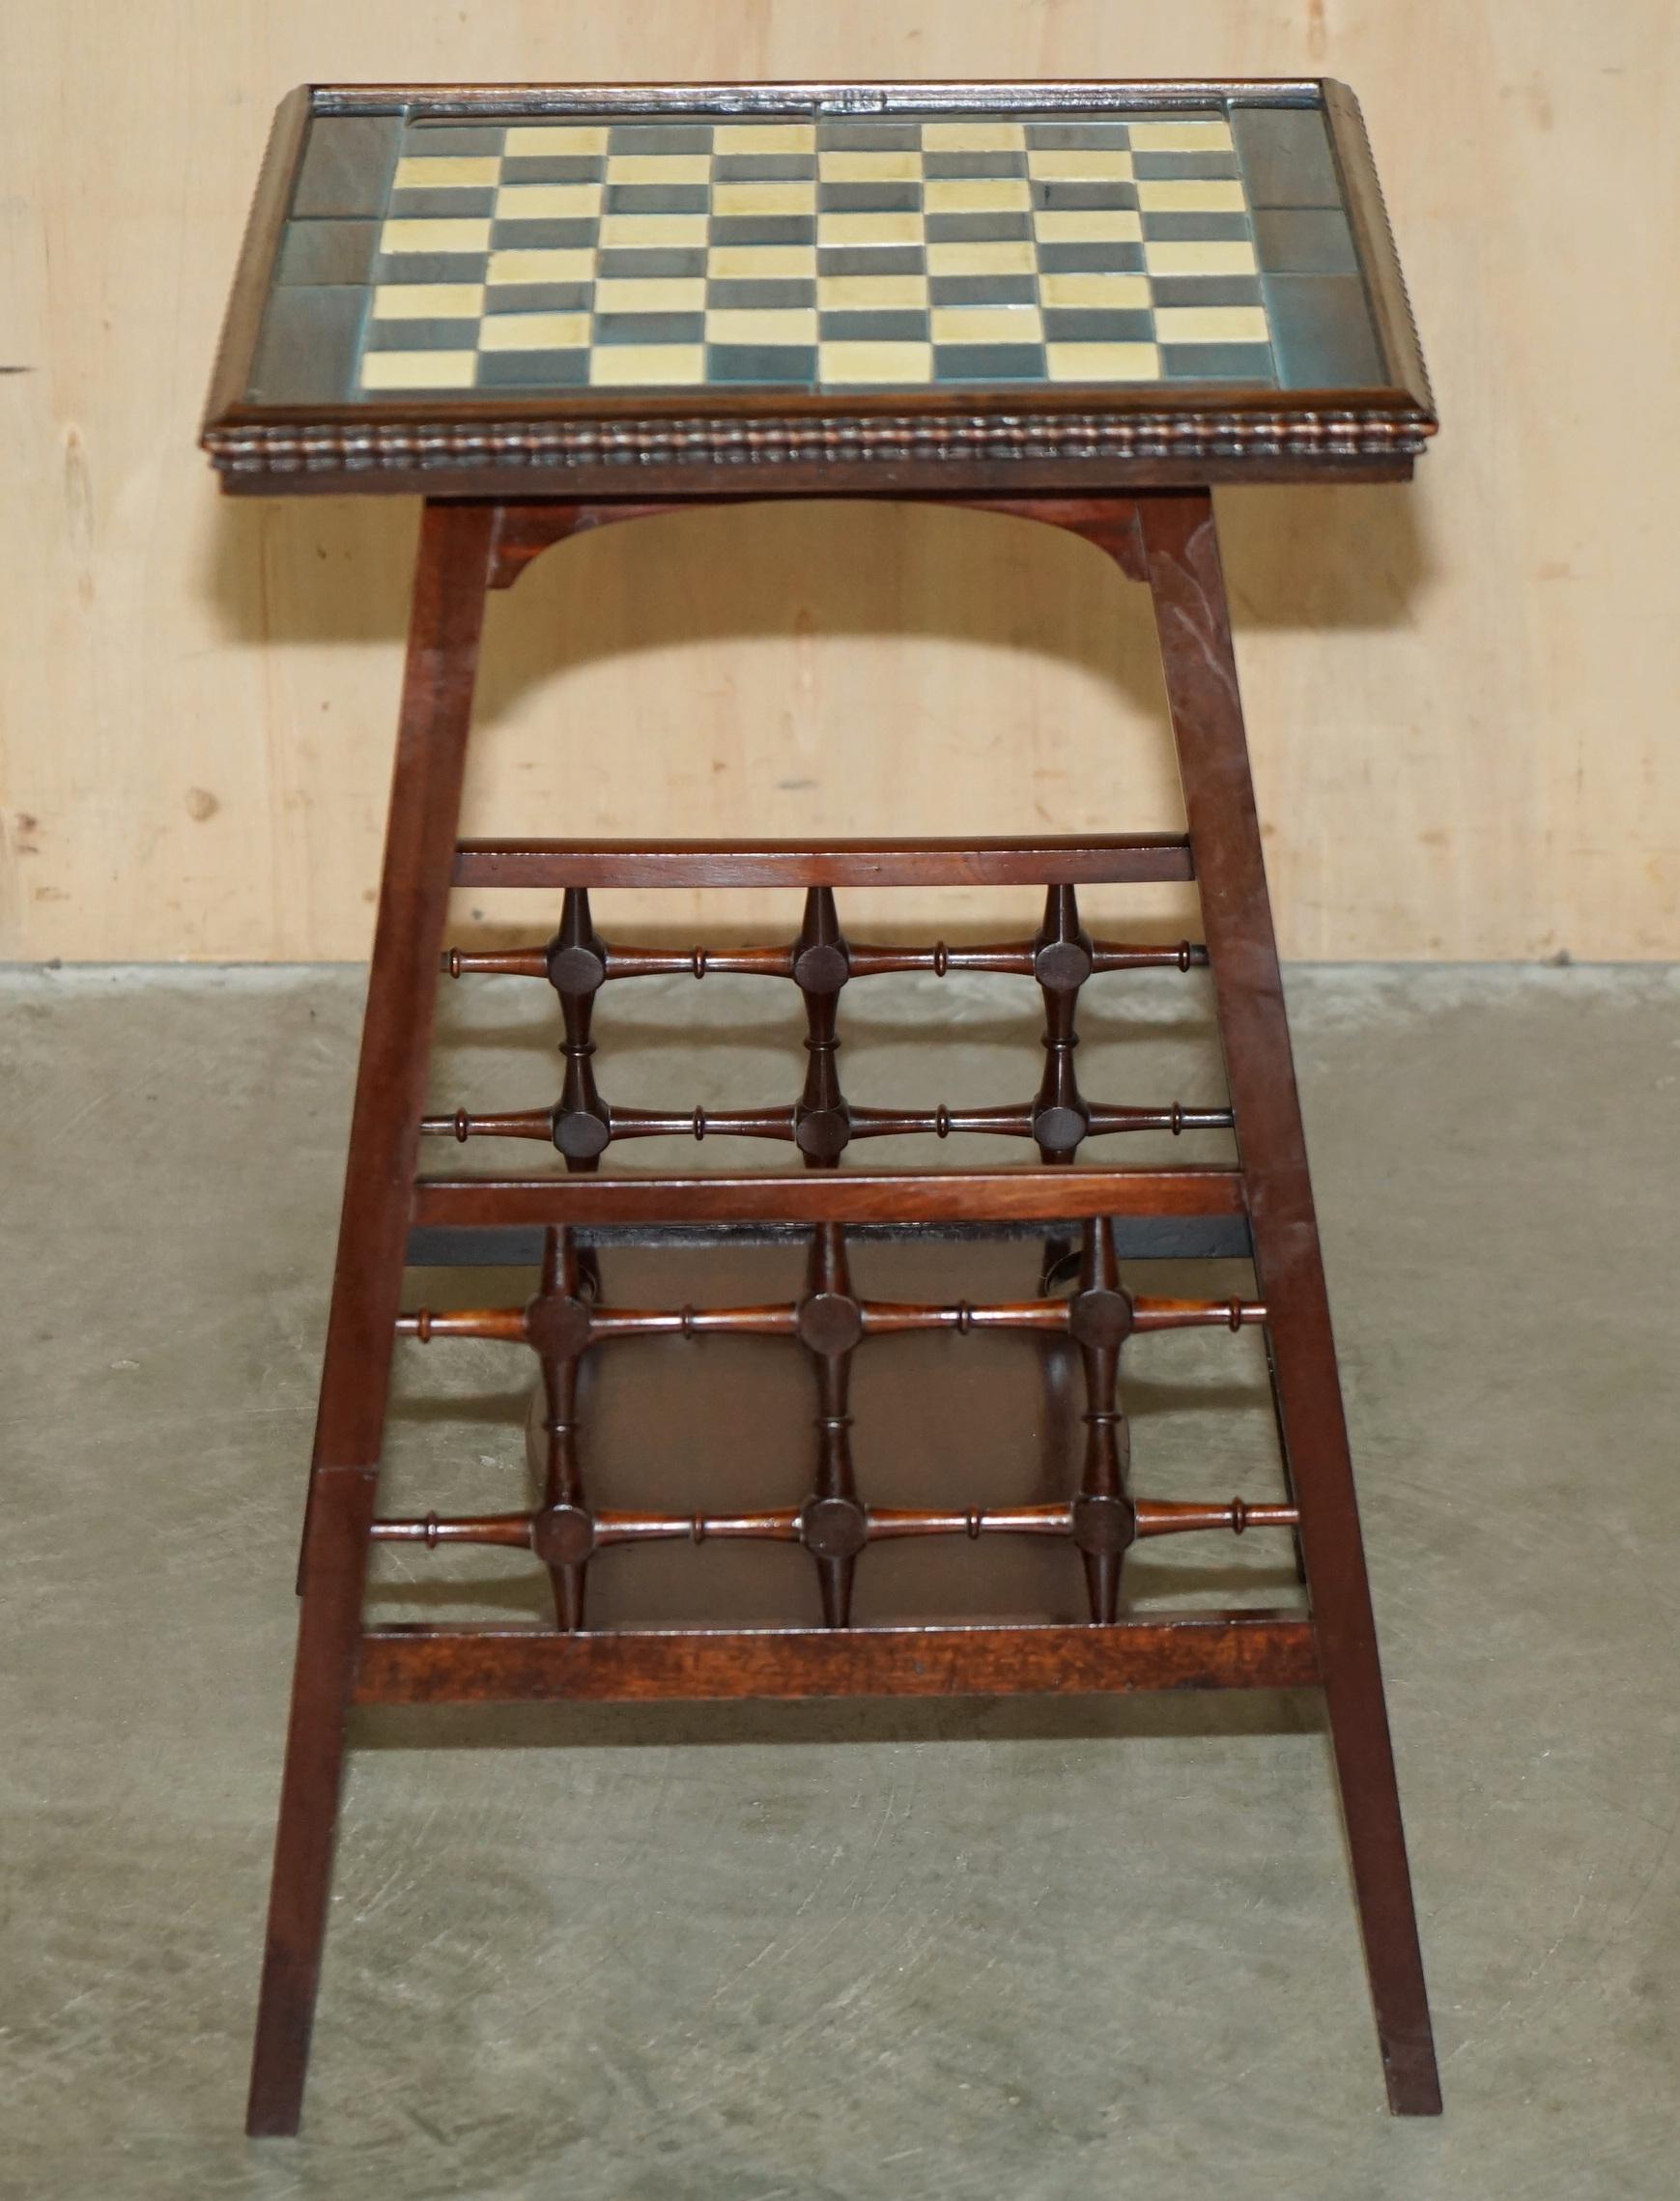 ANTIQUE VICTORIAN AESTHETIC MOVEMENT STYLE TiLED TOP CHESSBOARD CHESS TABLE For Sale 2